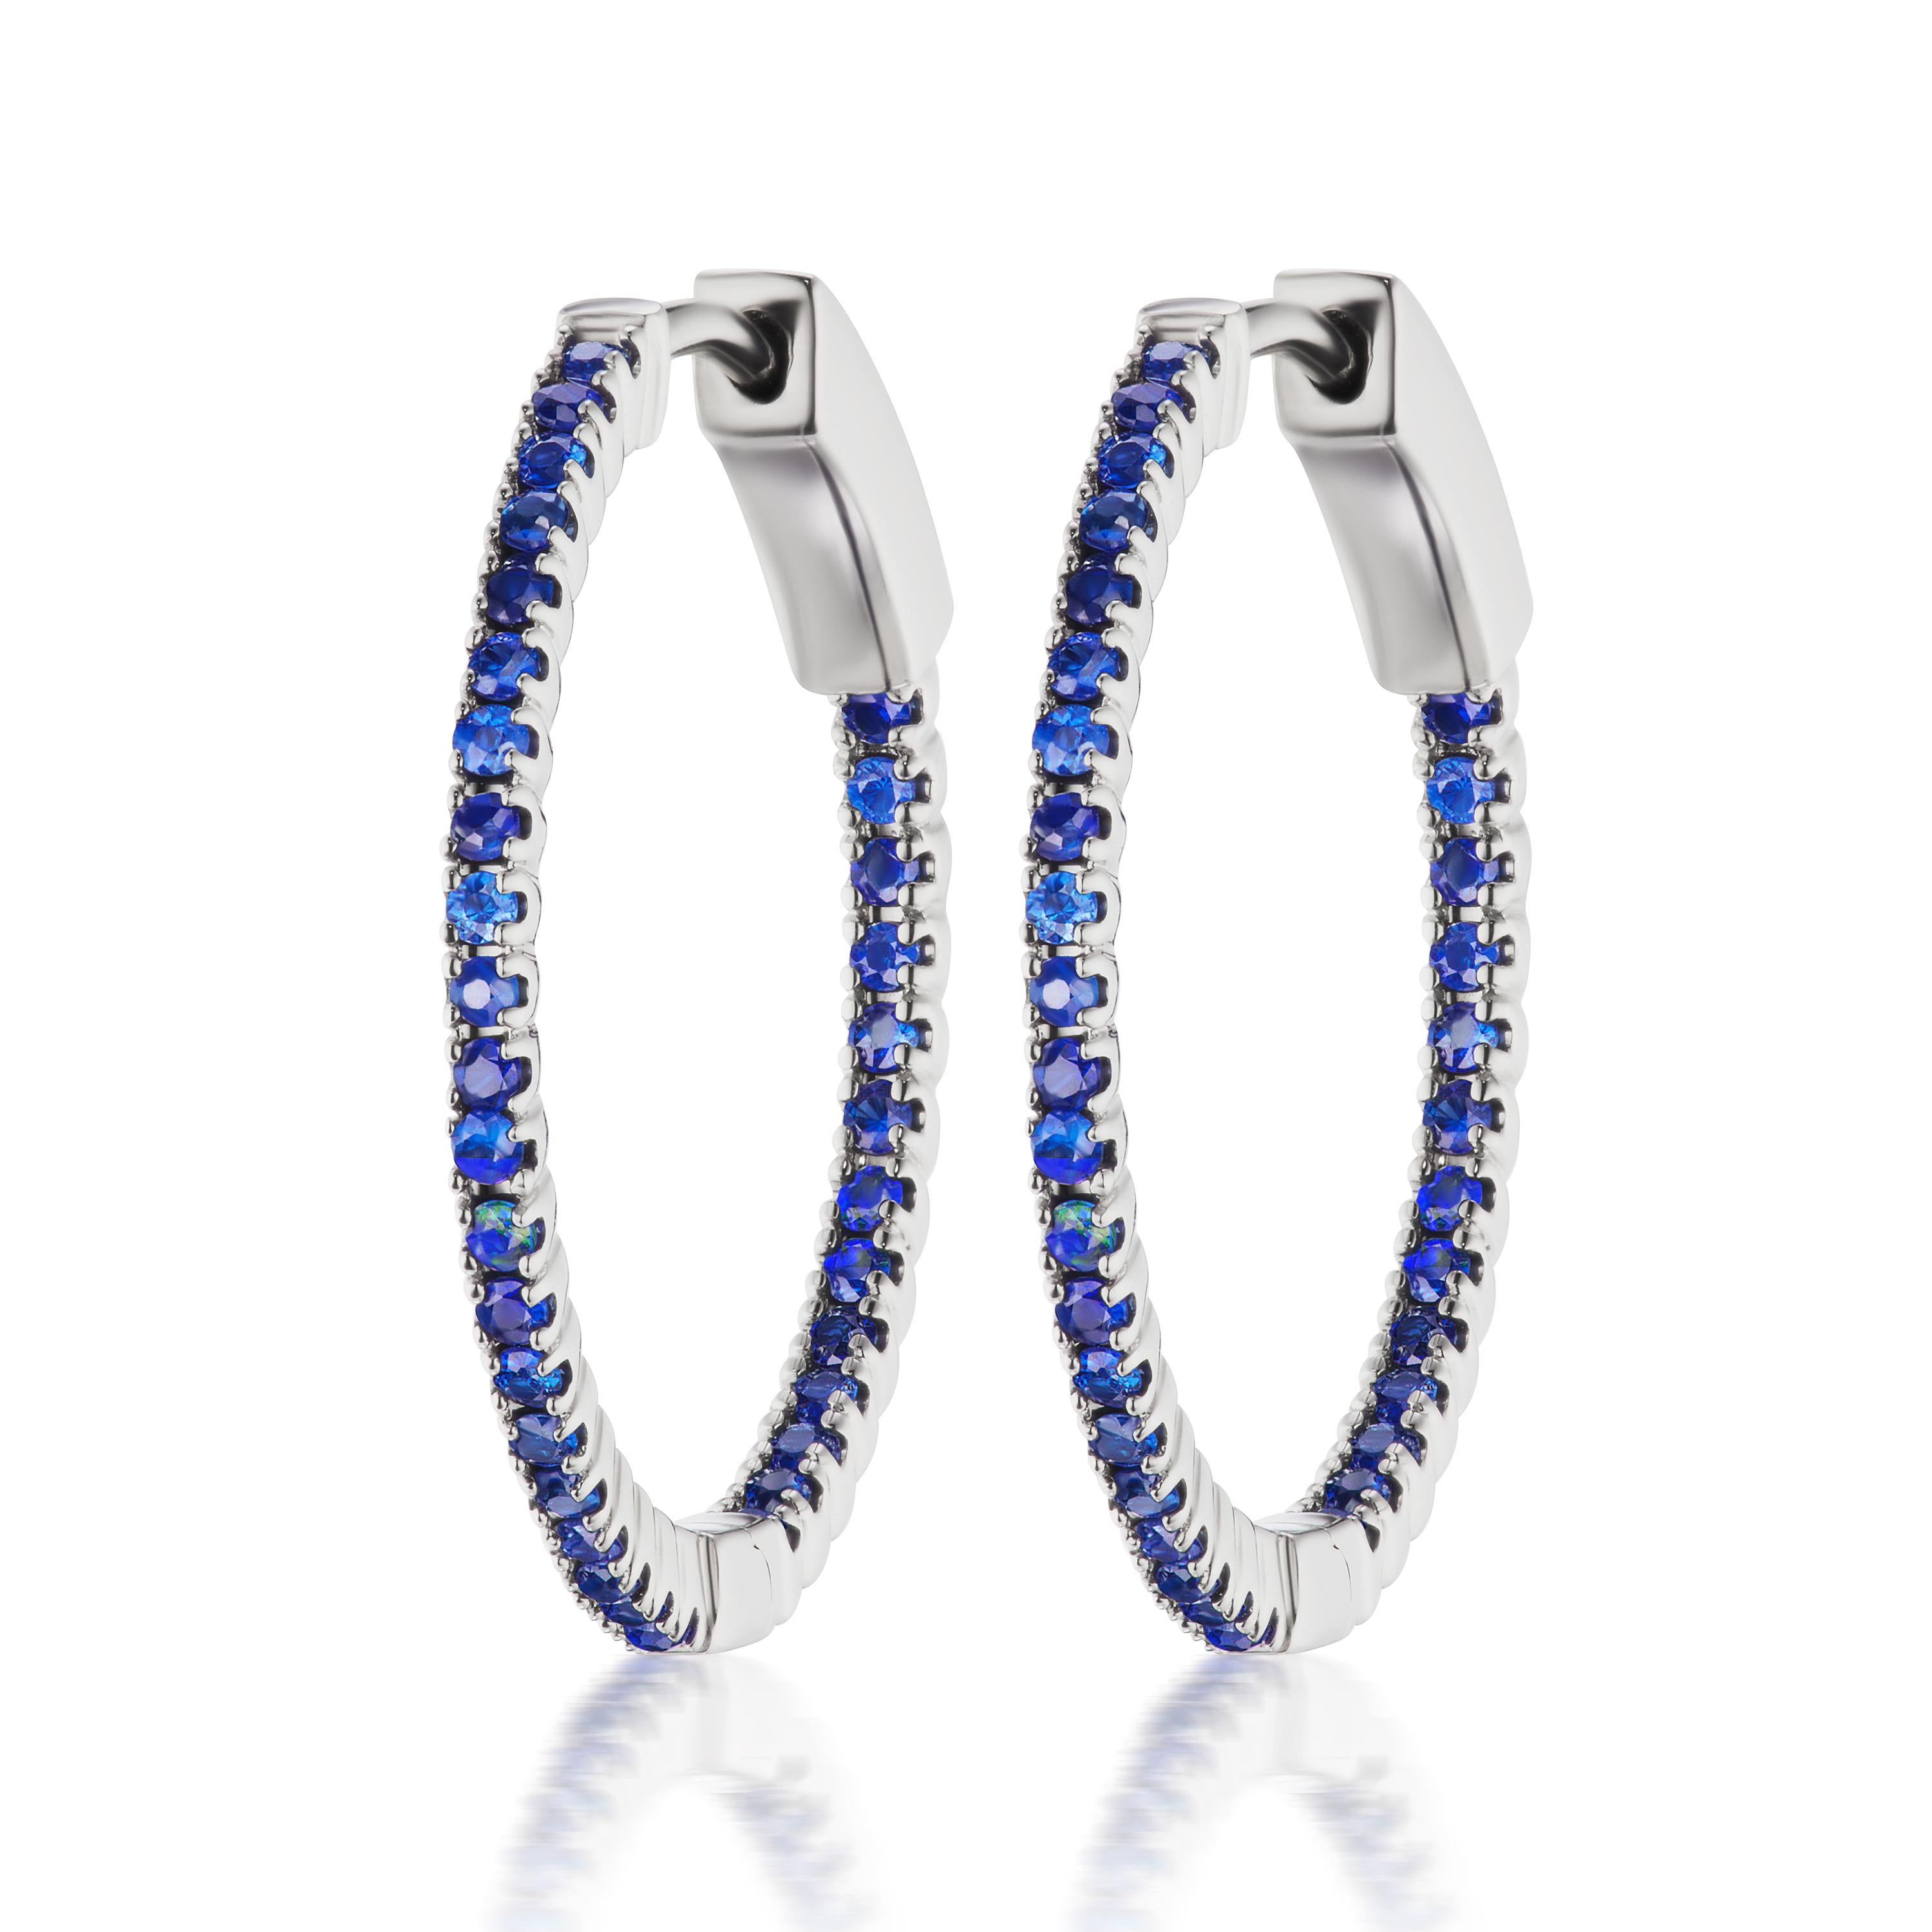 These glamorous hoop earrings crafted by Gemistry in 18K white gold are featured with dazzling blue sapphires on the inside and outside for maximum sparkle and shine.

Please follow the Luxury Jewels storefront to view the latest collections &